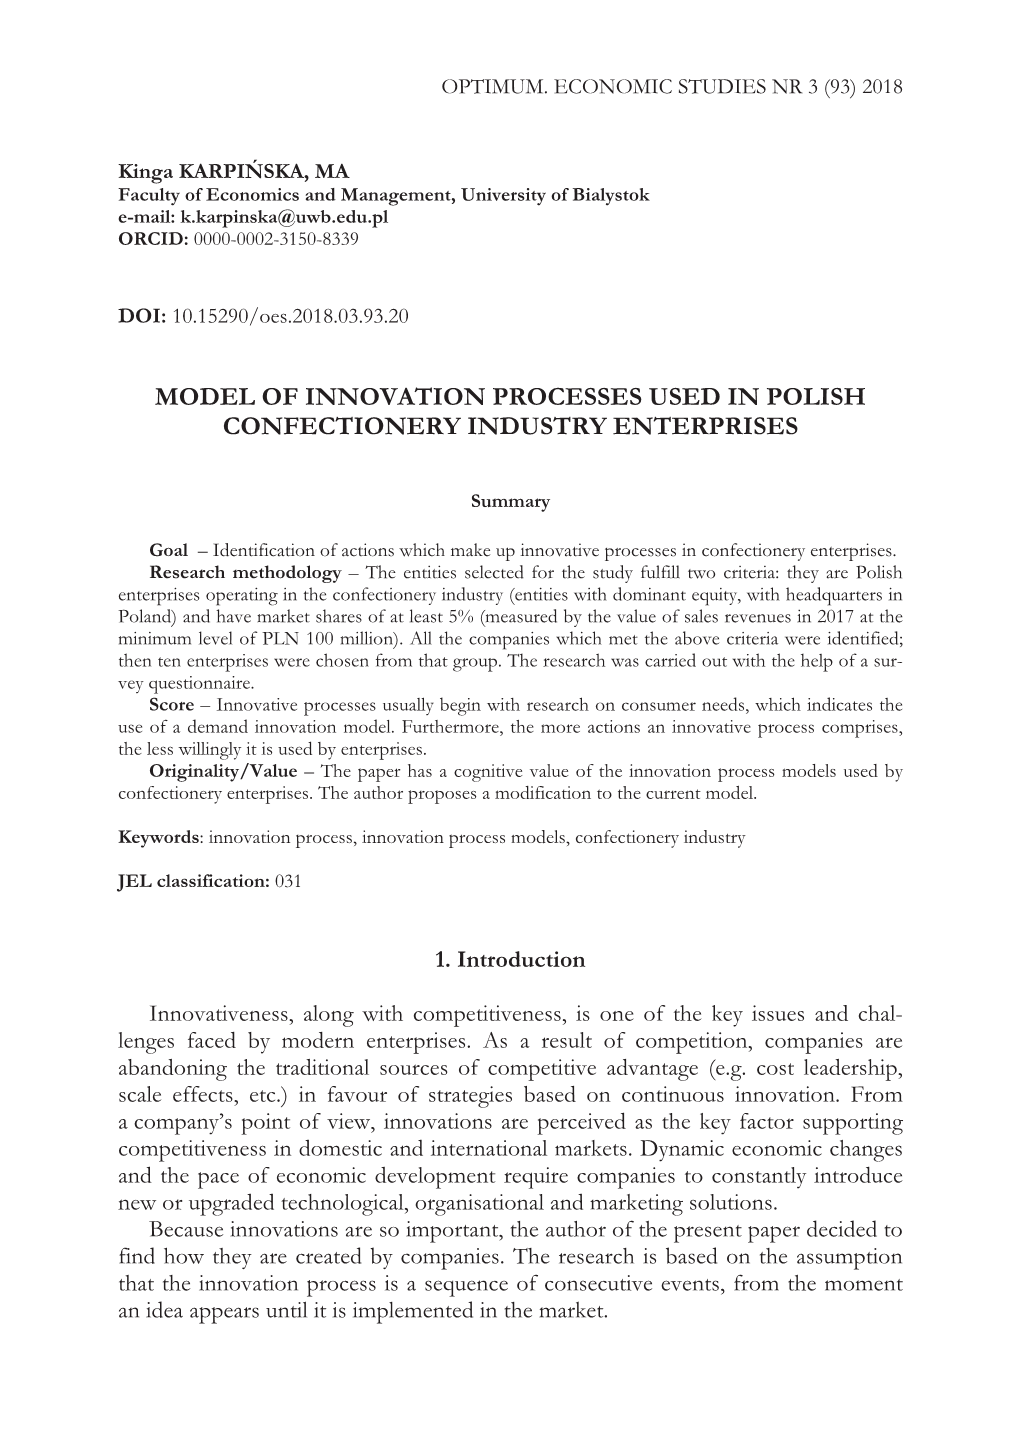 Model of Innovation Processused by the Enterprises of the Confectionery Industry in Poland